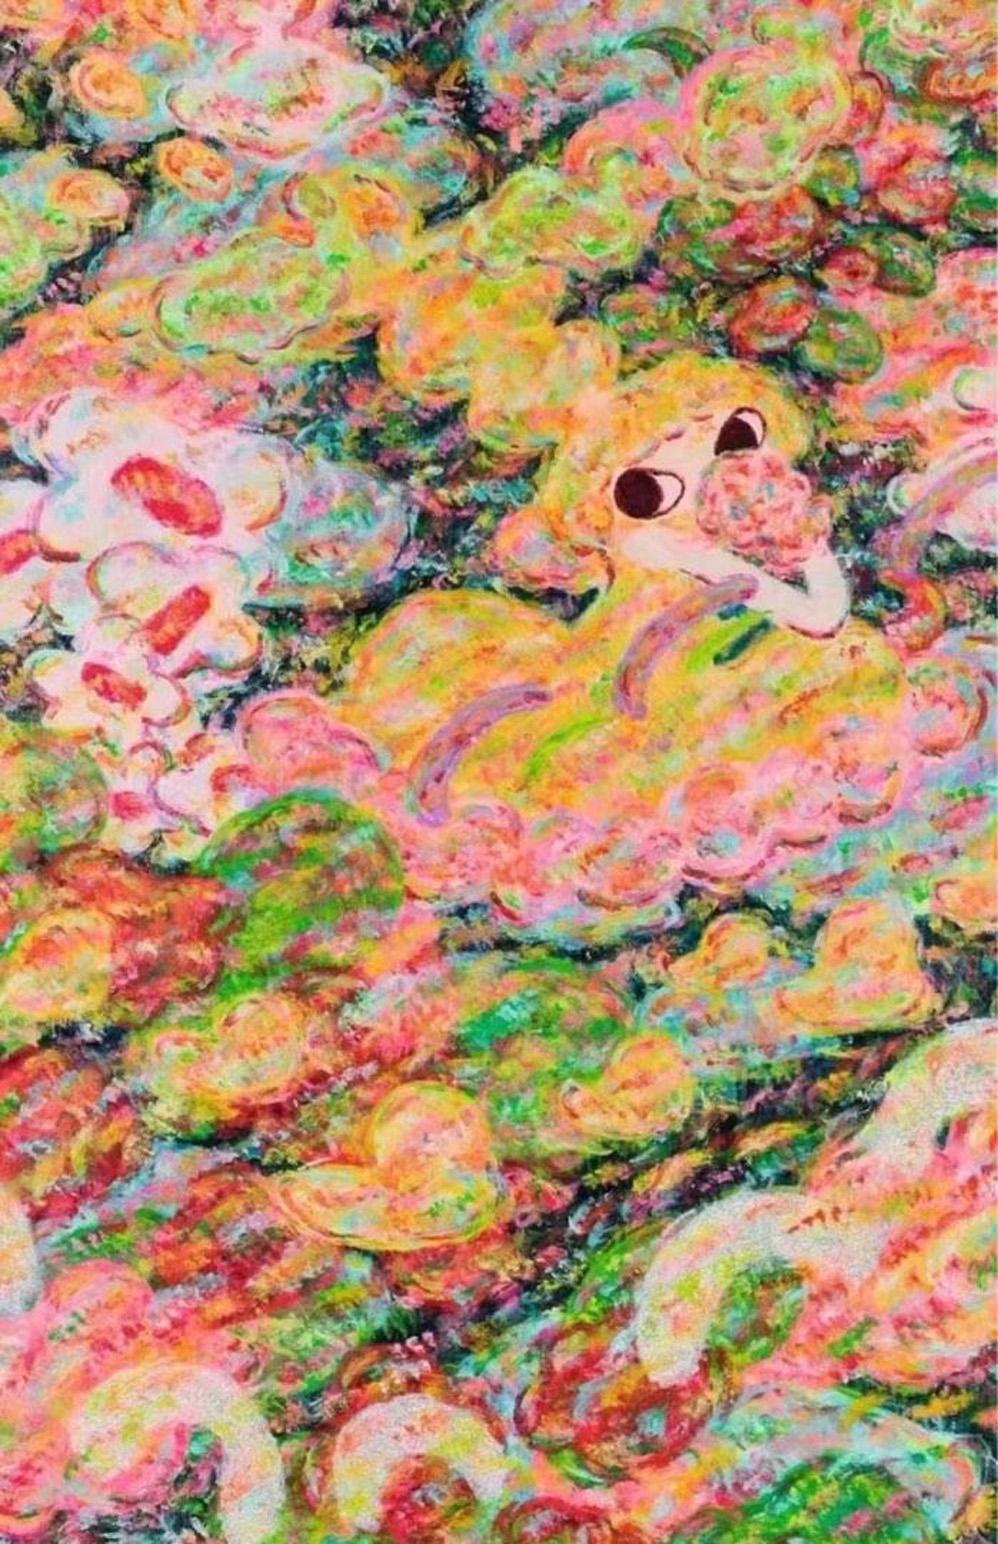 This cotton beach towel features Rokkaku's painting UNTITLED (2021), which depicts a floating dreamscape of colourful clouds. At a closer look, wide-eyed girls and other fantastical manga-style creatures appear in the cloud formations. Rokkaku